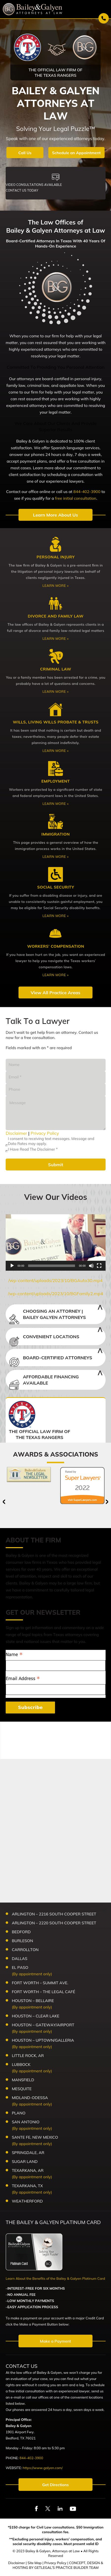 Bailey & Galyen, Attorneys at Law - Mesquite TX Lawyers